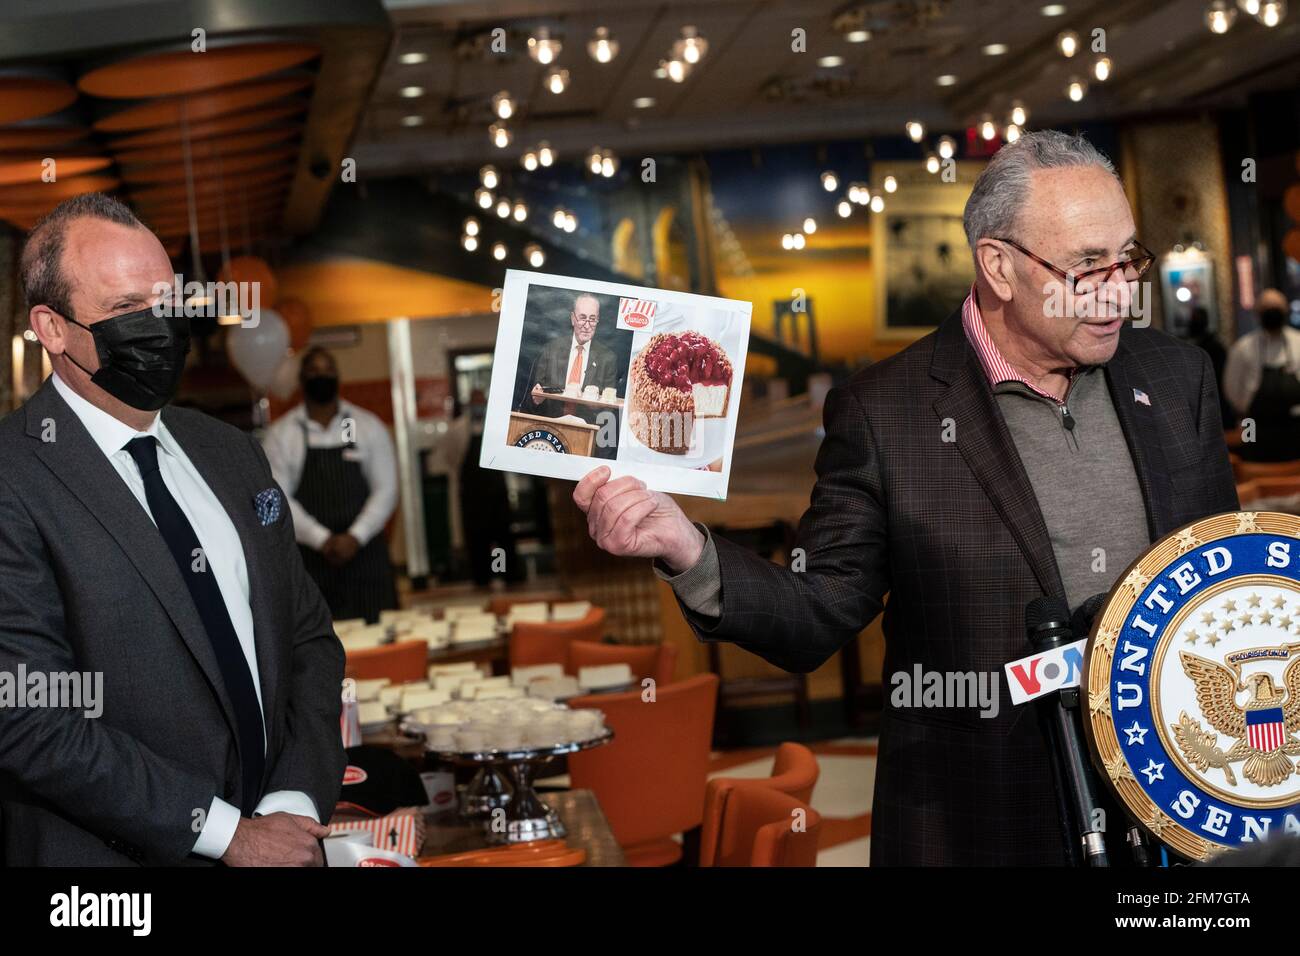 New York, NY - May 6, 2021: U. S. Senator Charles Schumer marks re-opening of Junior’s Cheesecake restaurant on Times Square Stock Photo